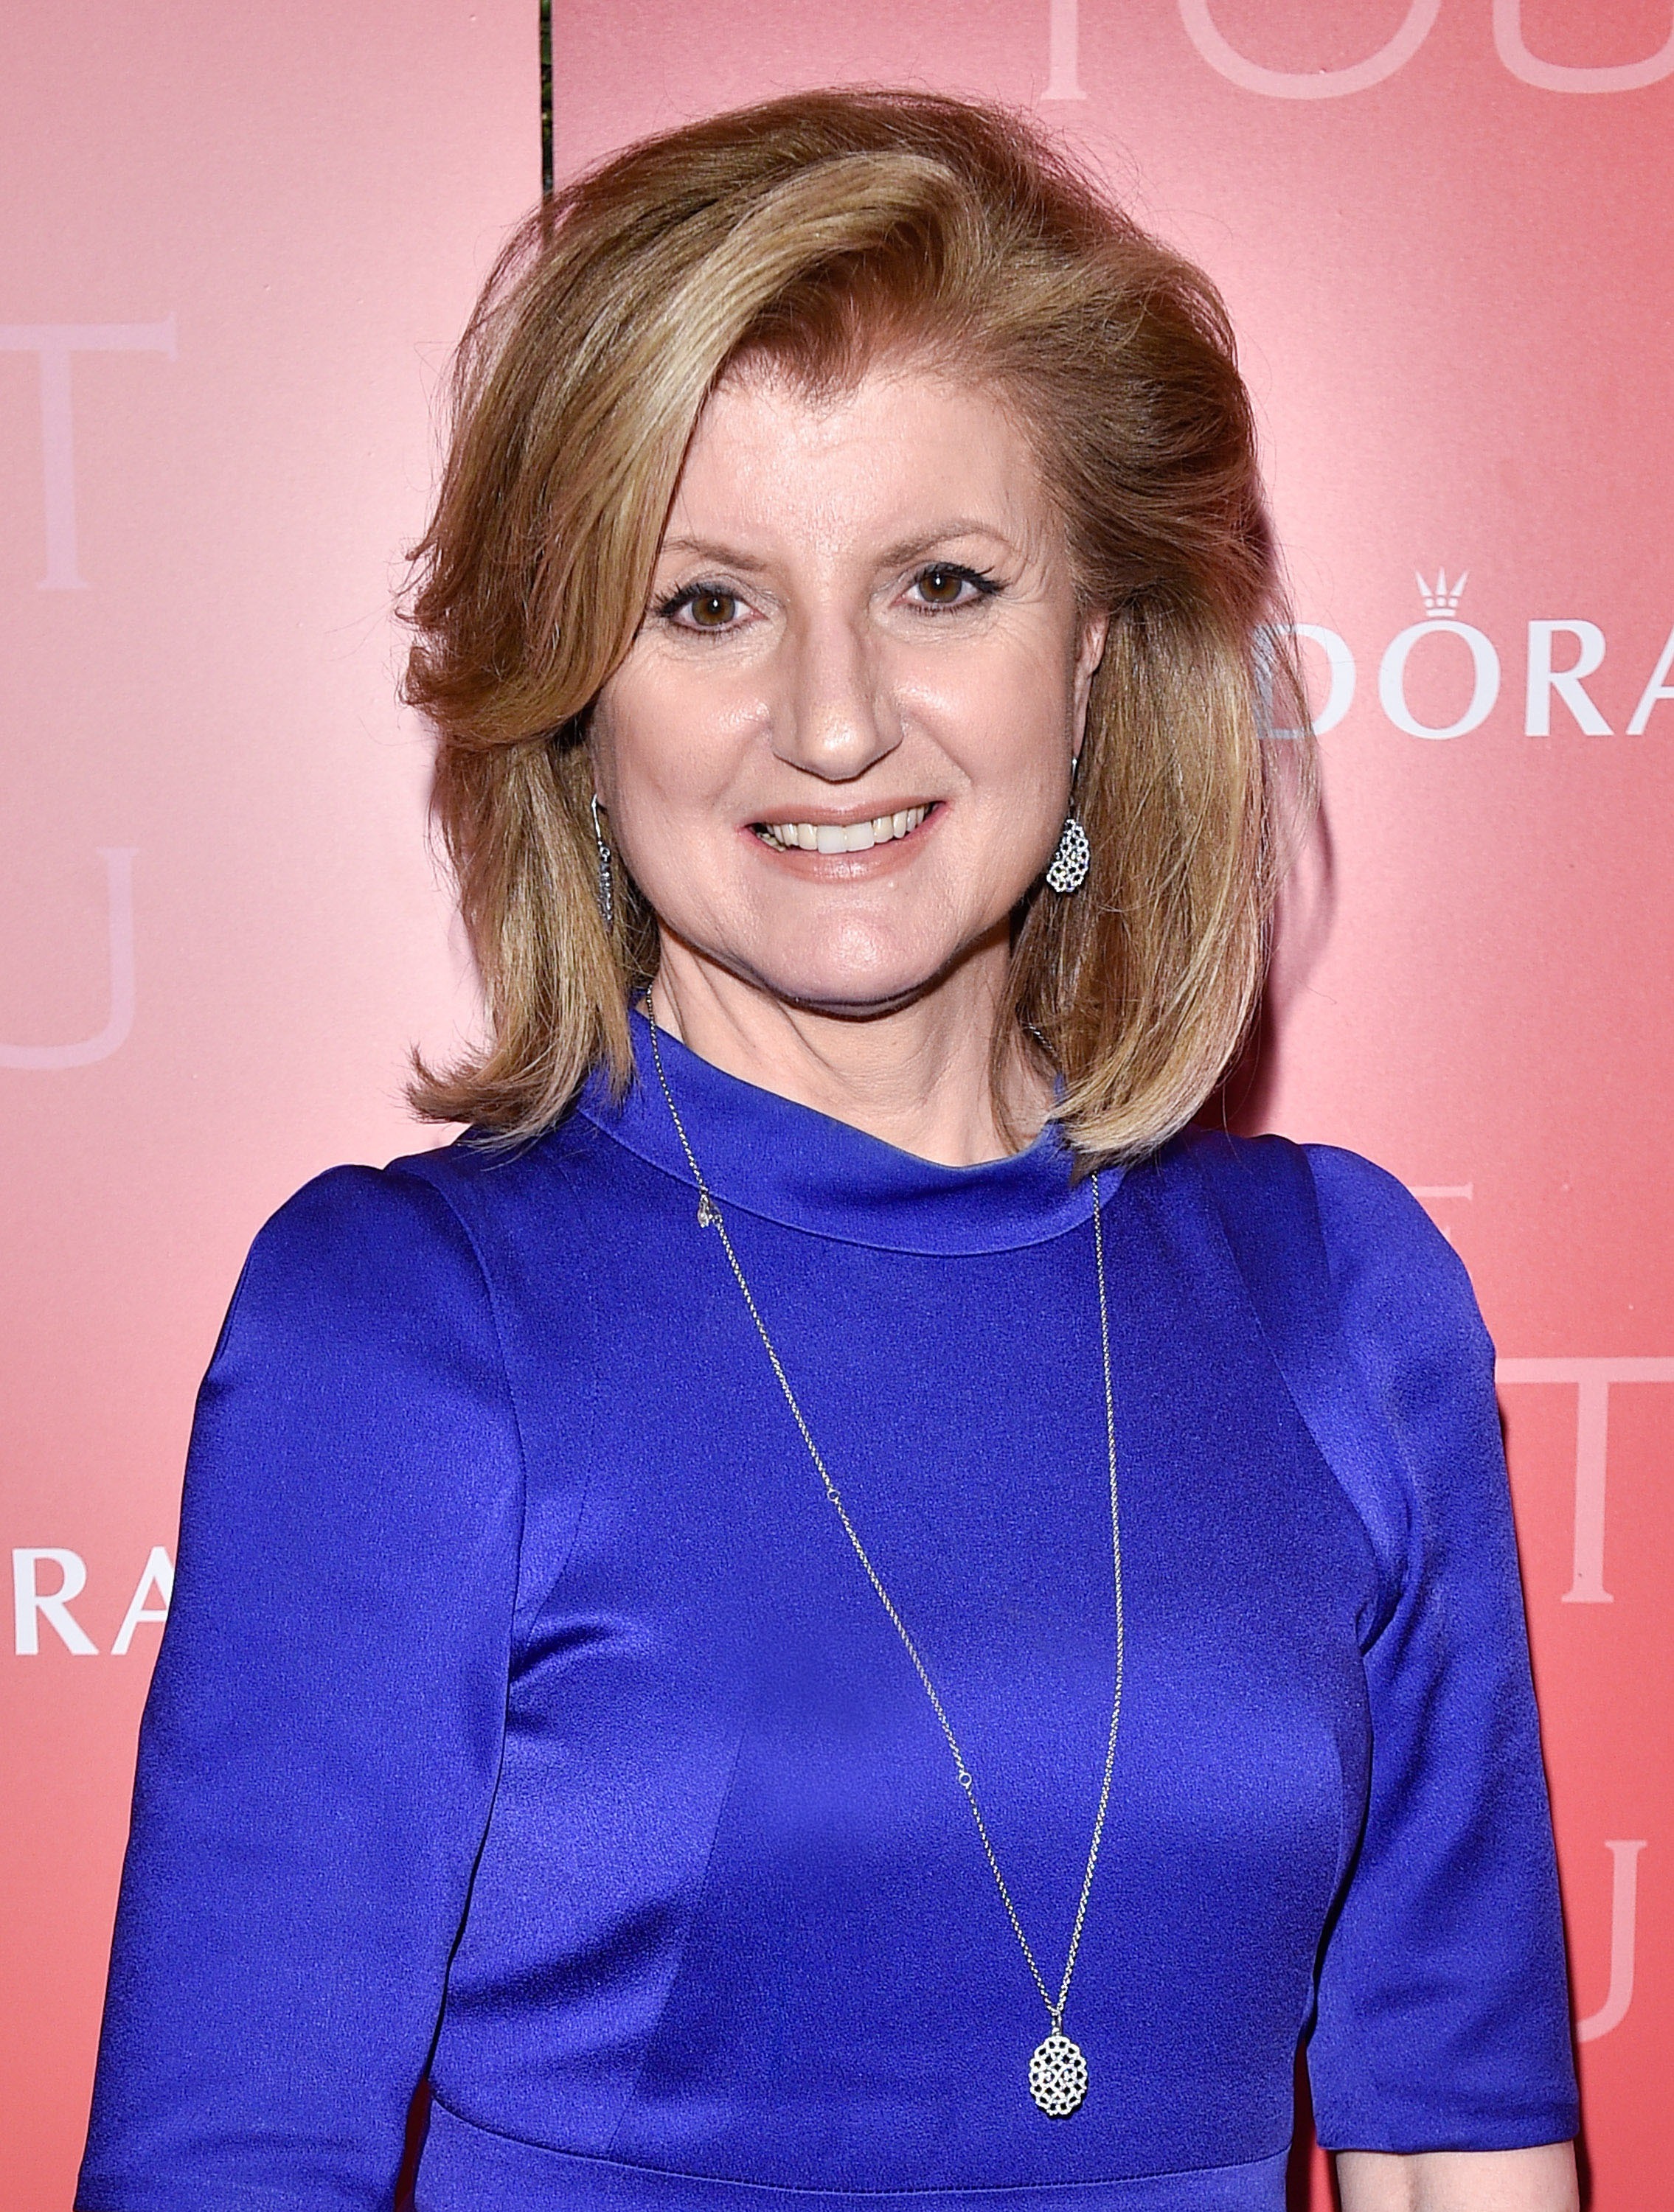 Arianna Huffington at Unique Lives event in Toronto on June 1, 2015.